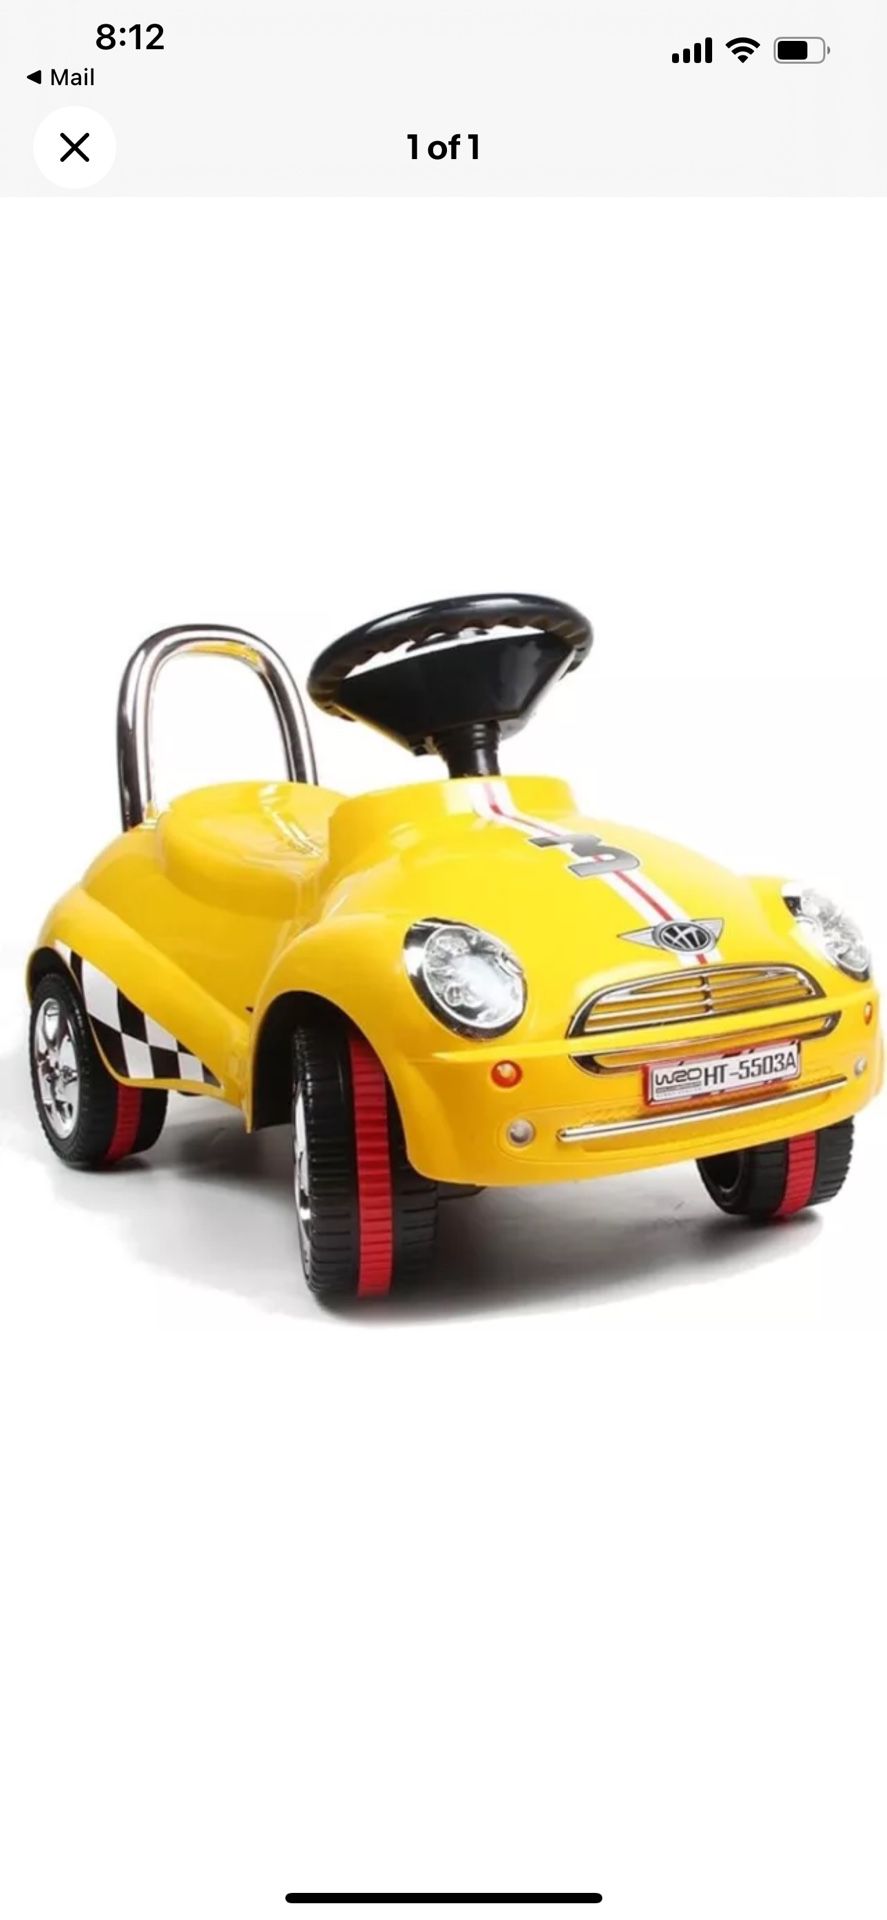 3-in-1 Ride On Car Toy Gliding Scooter with Sound & Light Yellow